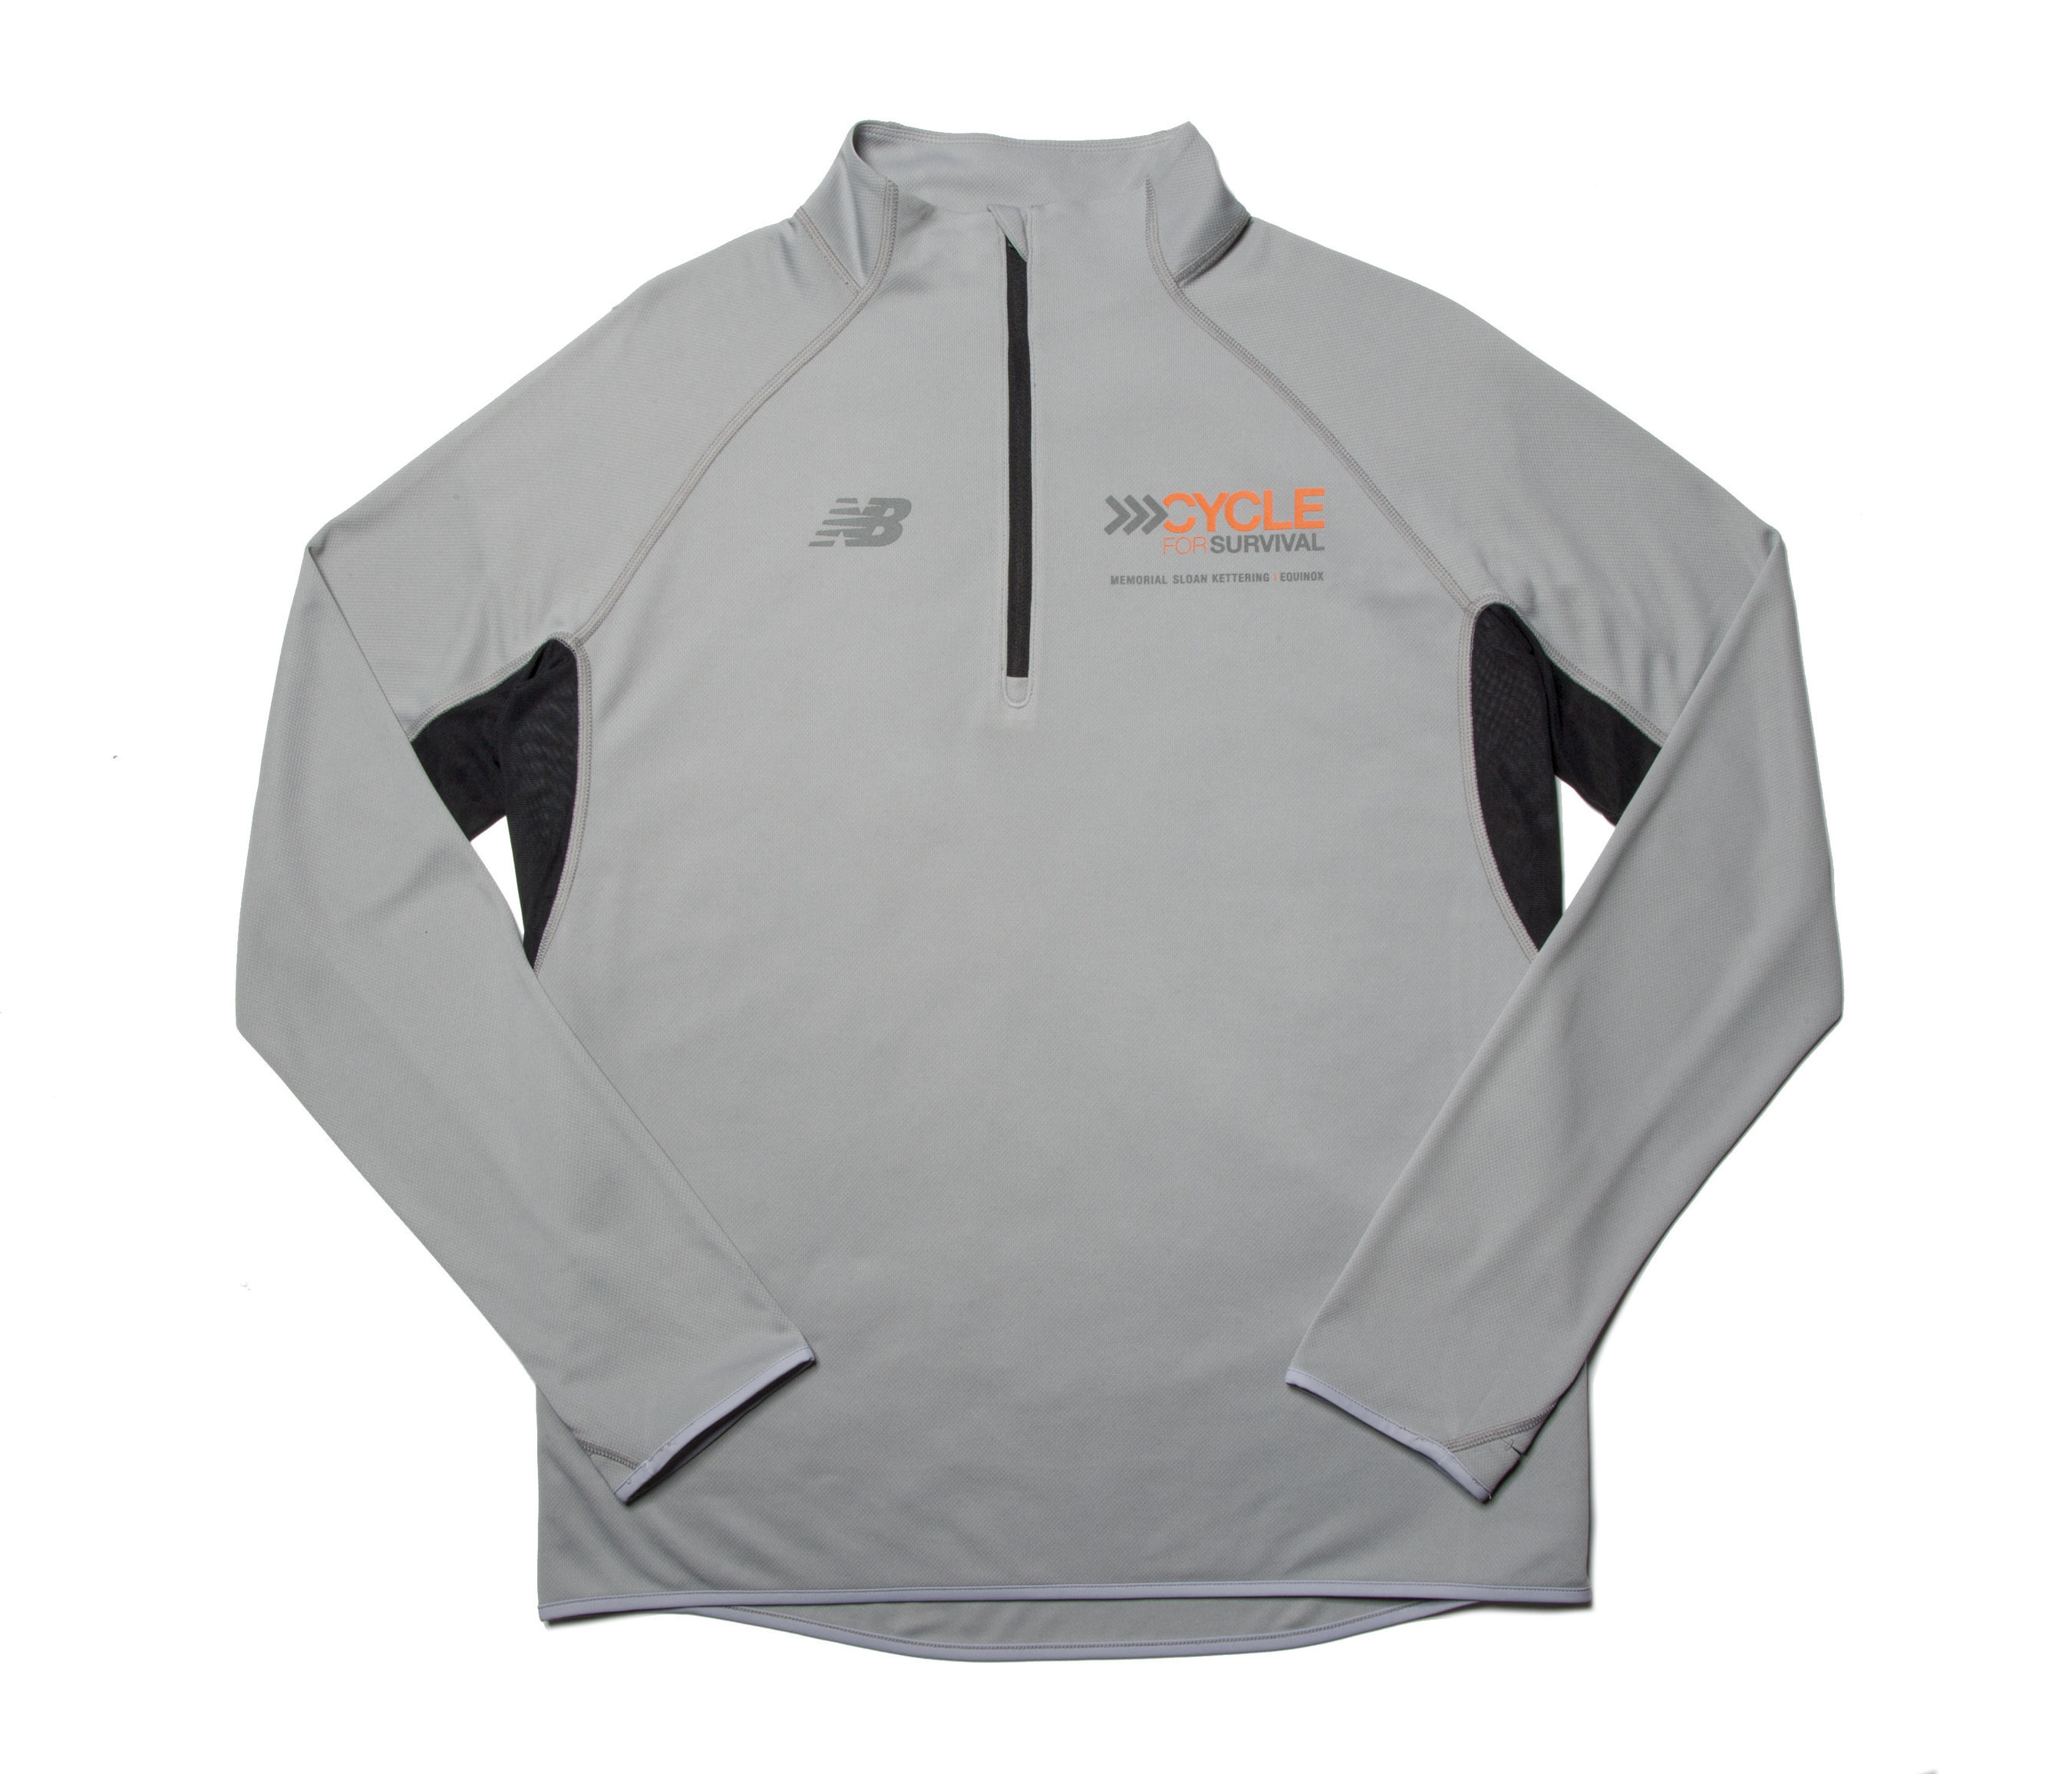 New Balance Performance Half Zip for Cycle for Survival's 2015 events